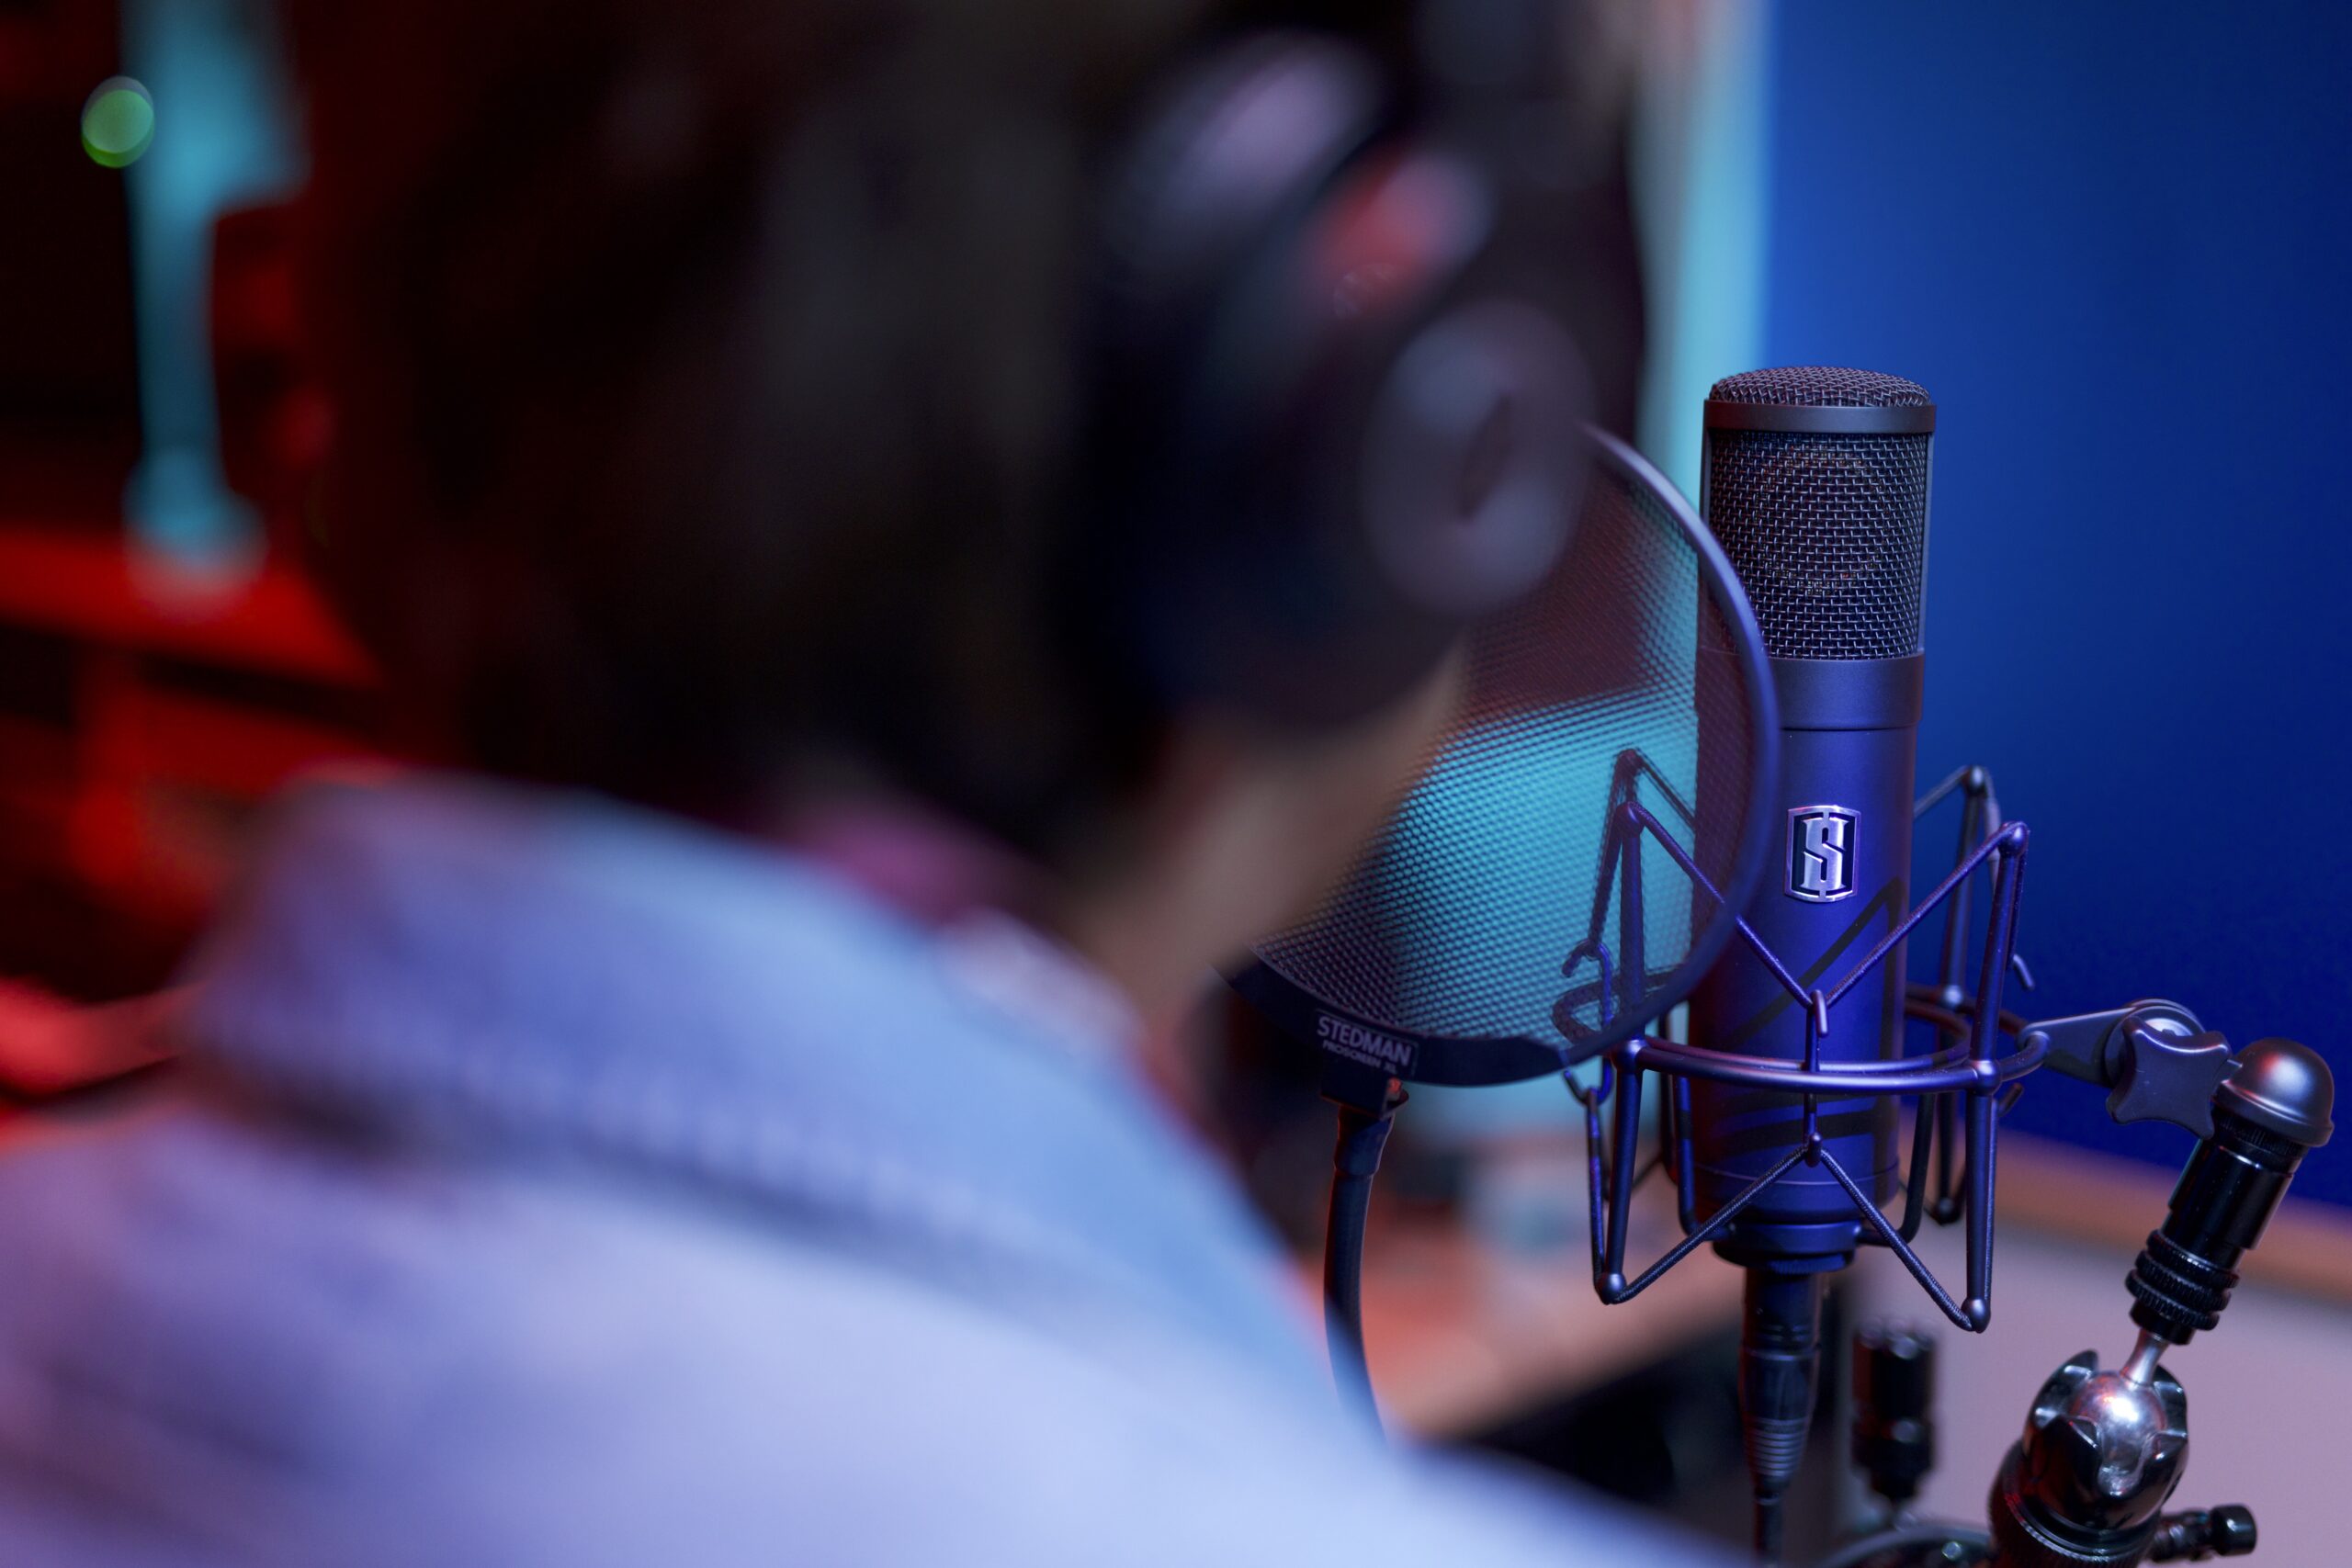 A musician recording with the Slate Digital ML-1 modeling microphone.